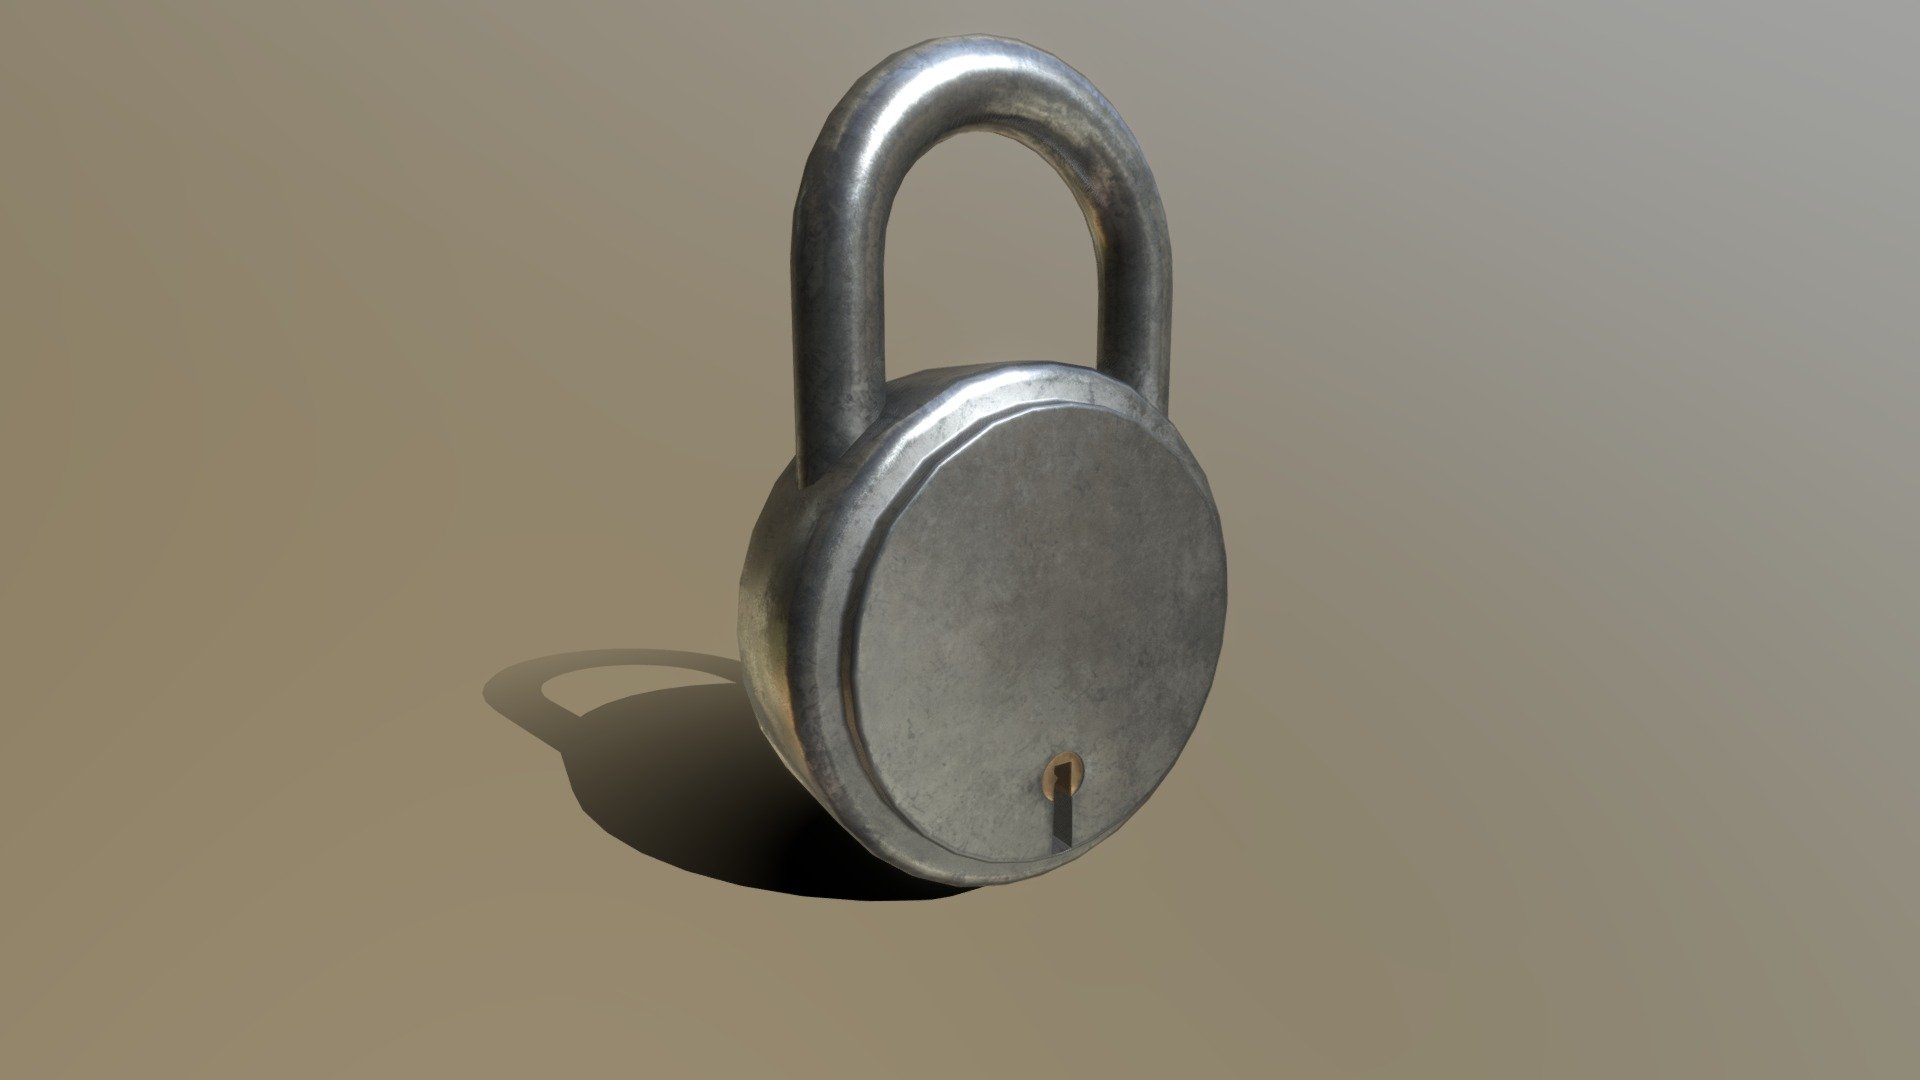 This is a model of an old Steel lock suitable to be used in games. 
modeled in blender and textured in substance painter 3d model